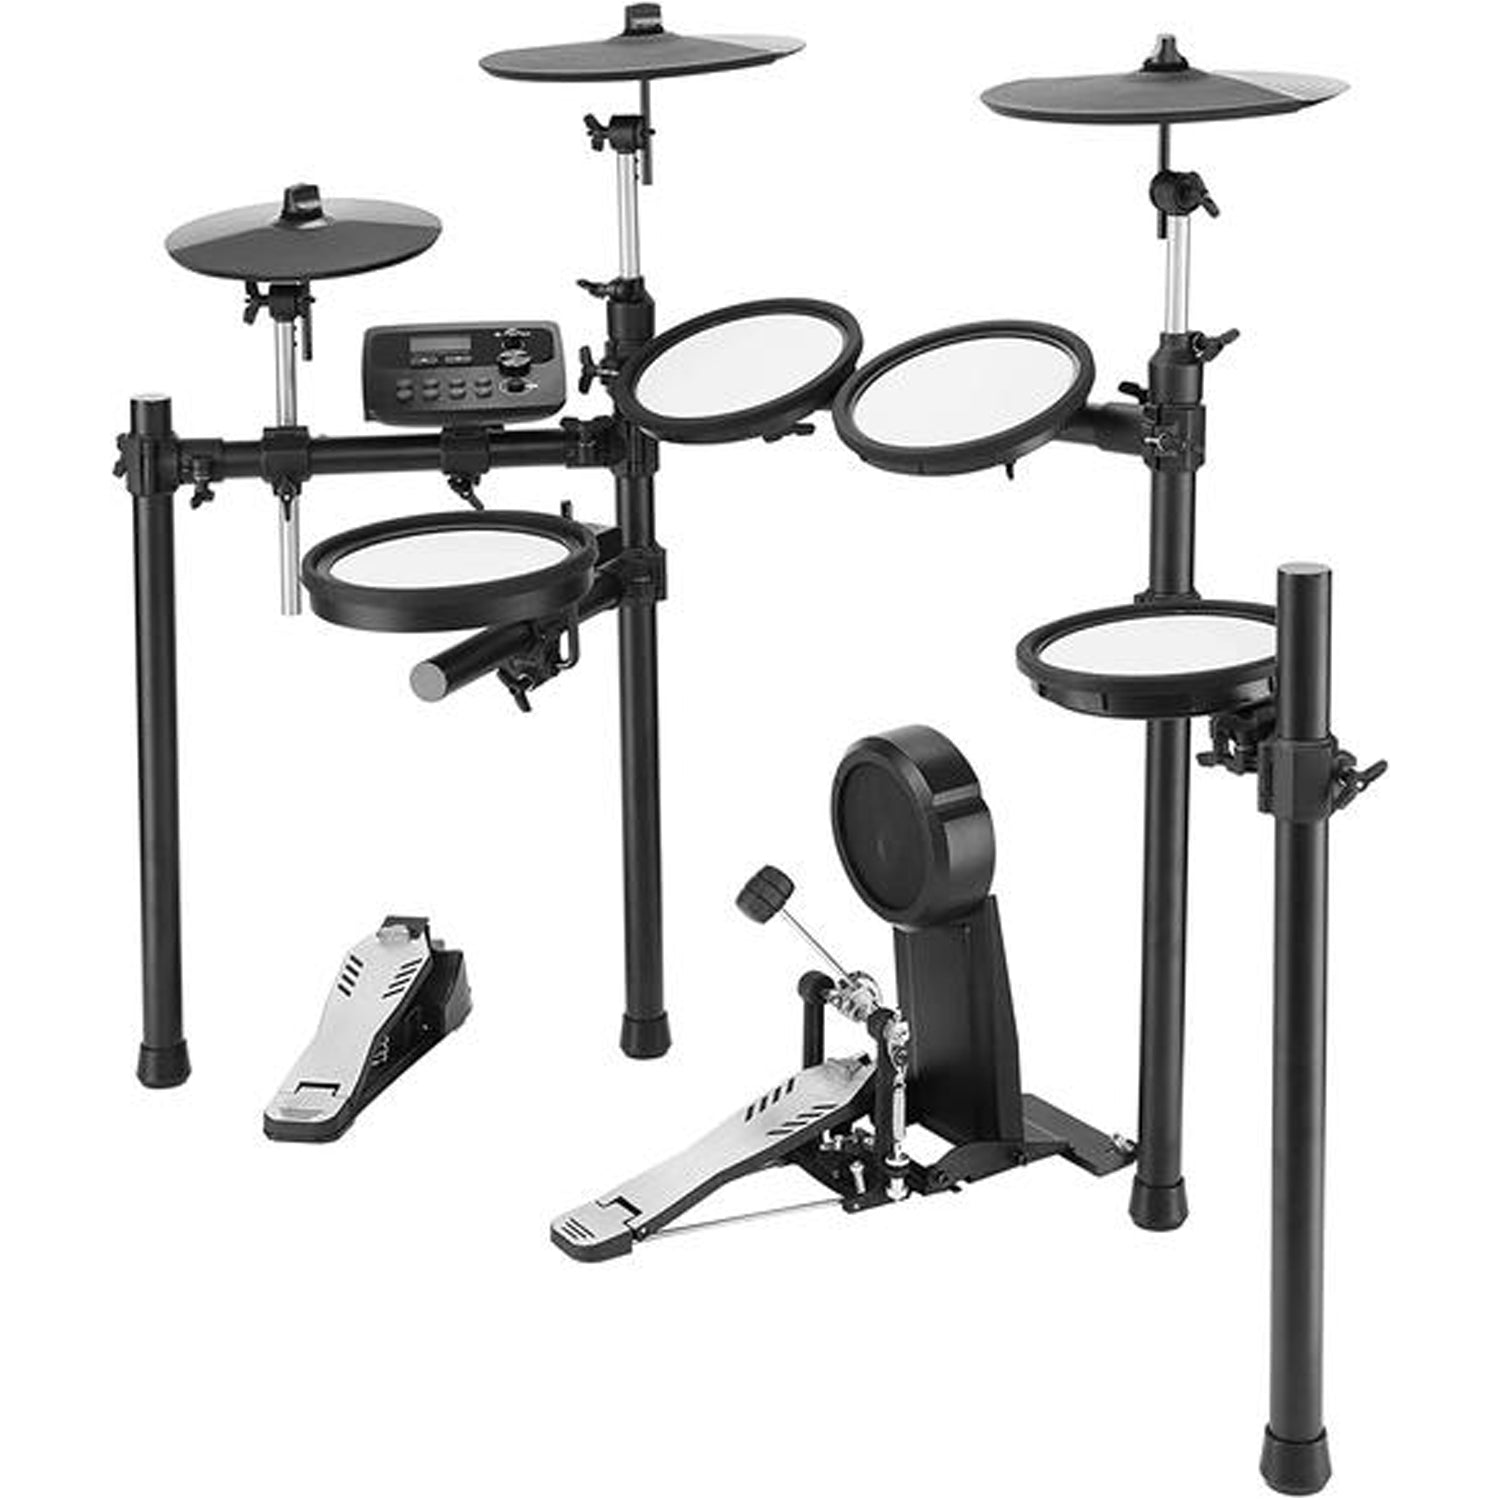 

Donner DED-300 Professional Electronic Drum Set with Bass Drum Drumsticks/Audio Cable